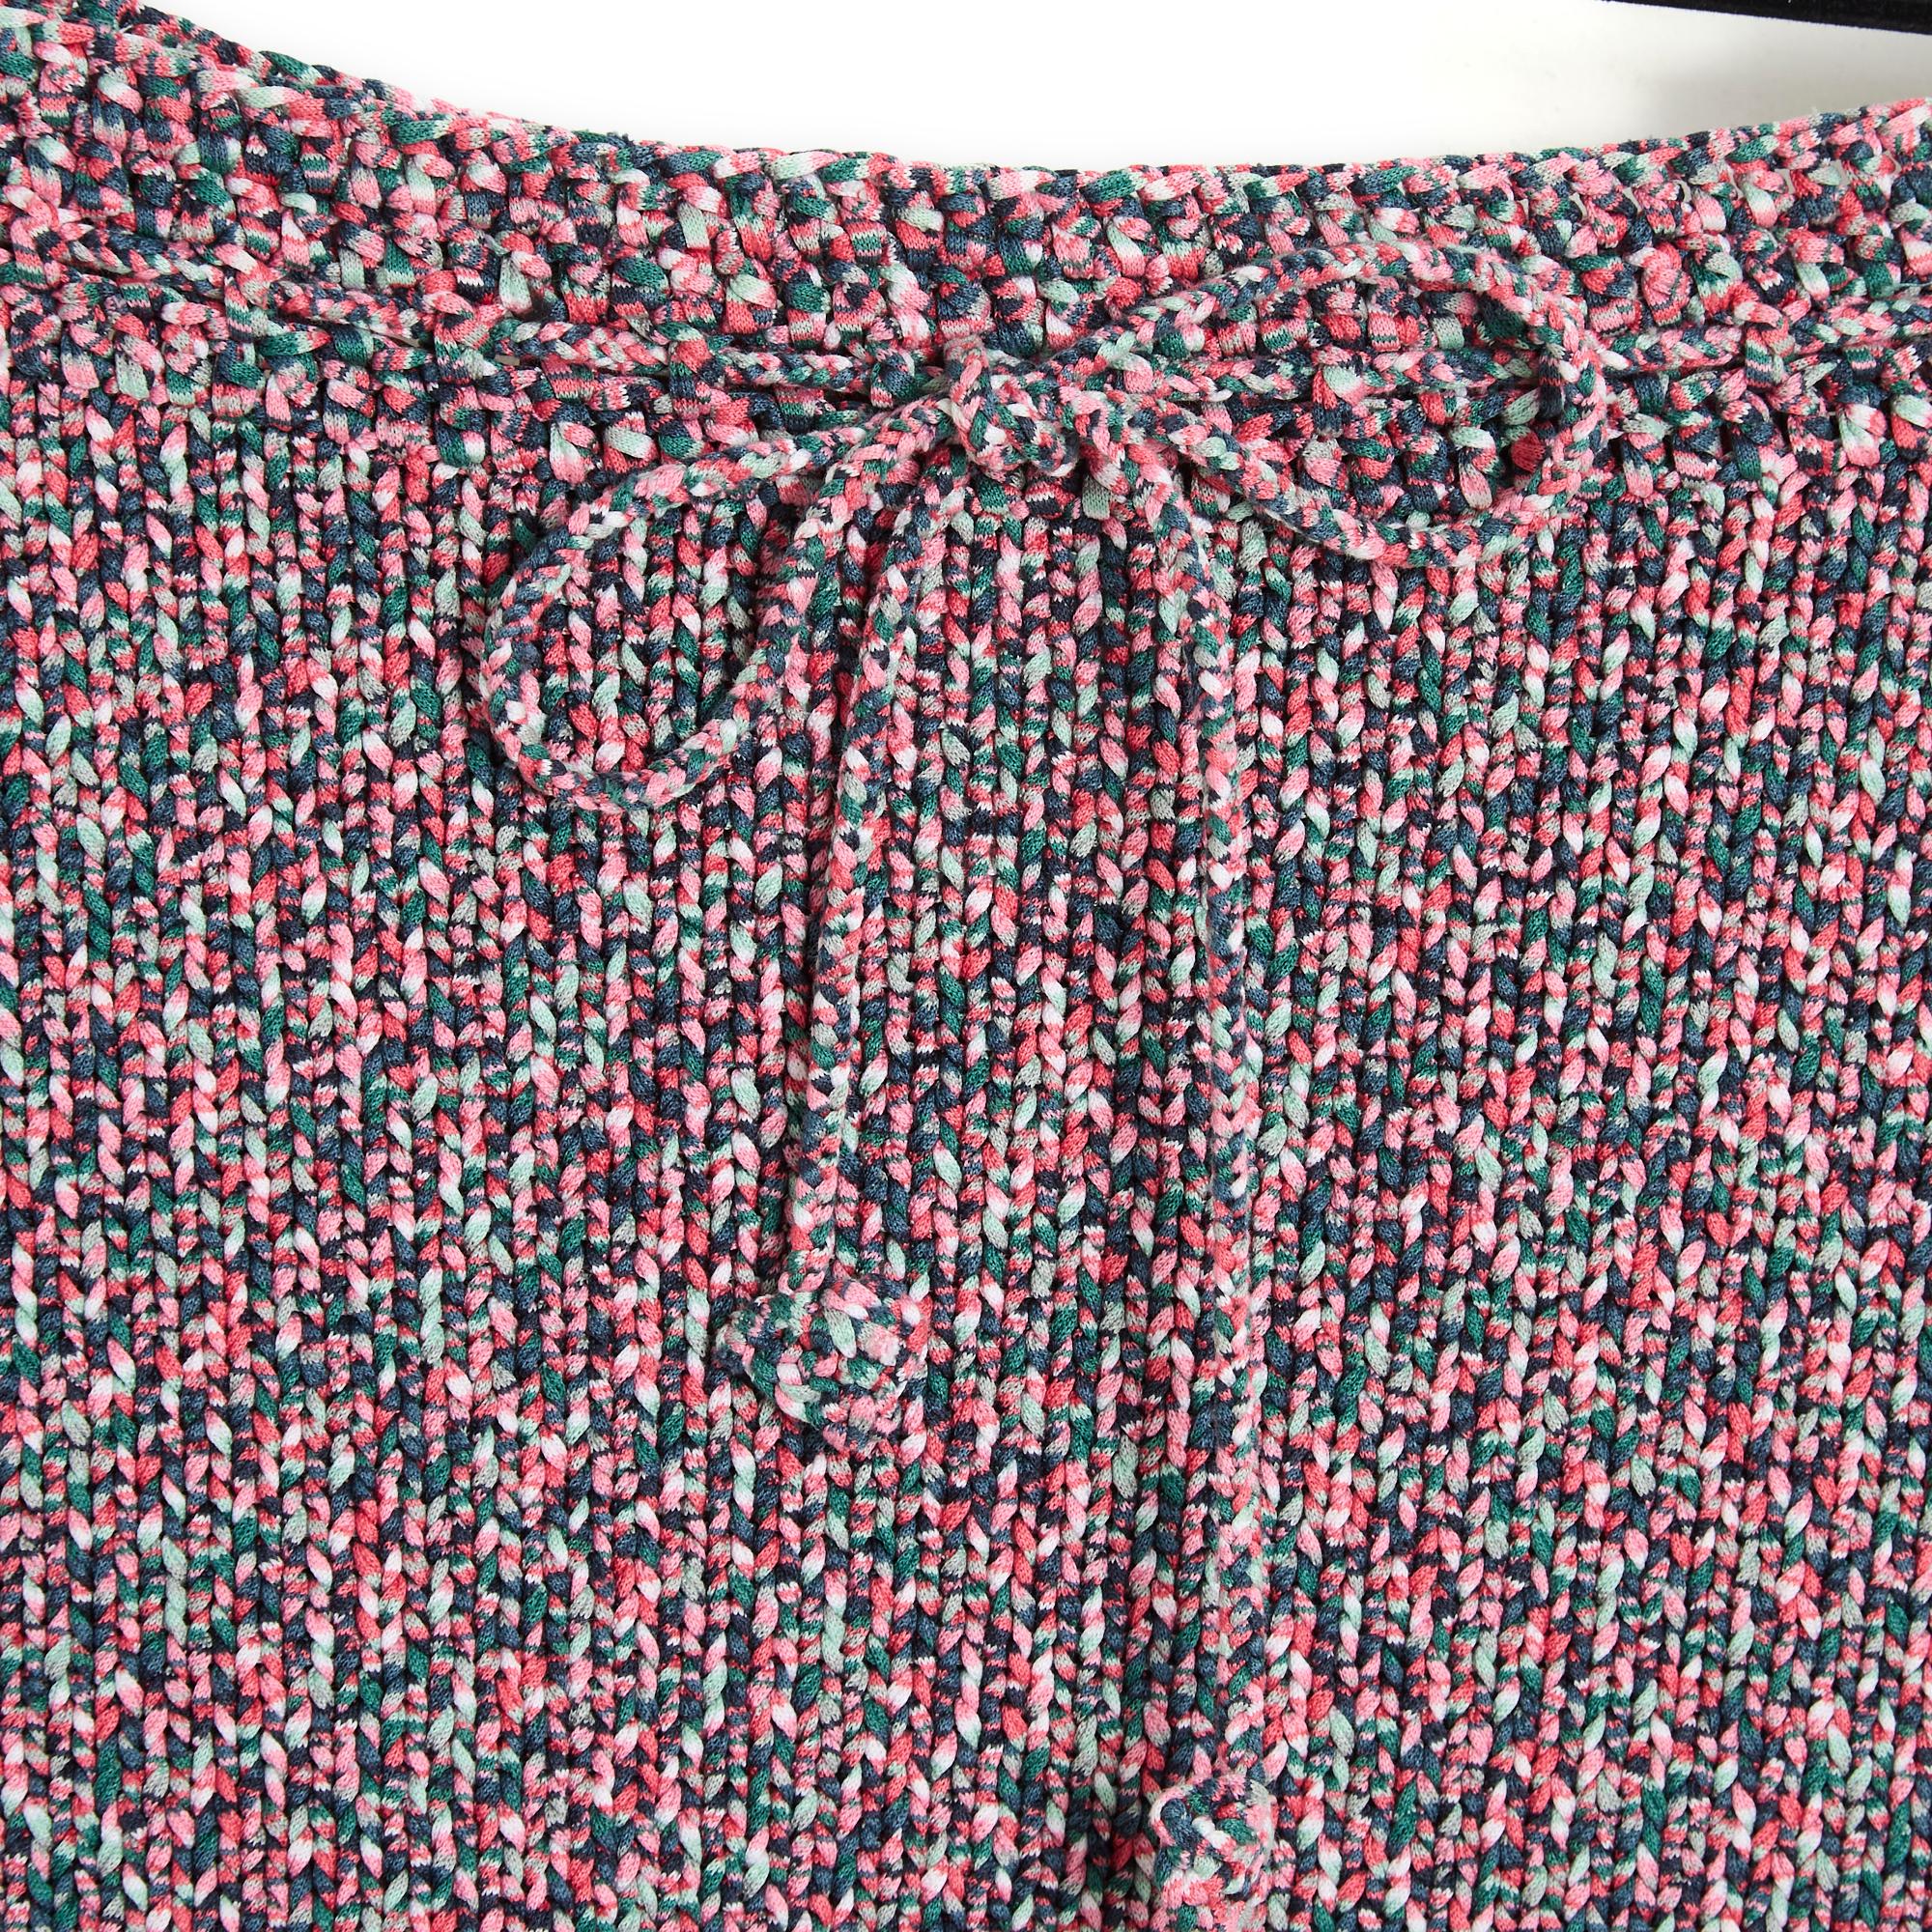 Short Chanel skirt from the Cruise 2012 collection in cotton knit in shades of pink, green and ecru, low waist held in place by a drawstring, bottom of the skirt decorated with a croquet, unlined, Chanel logo in silver metal and gray enamel stitched